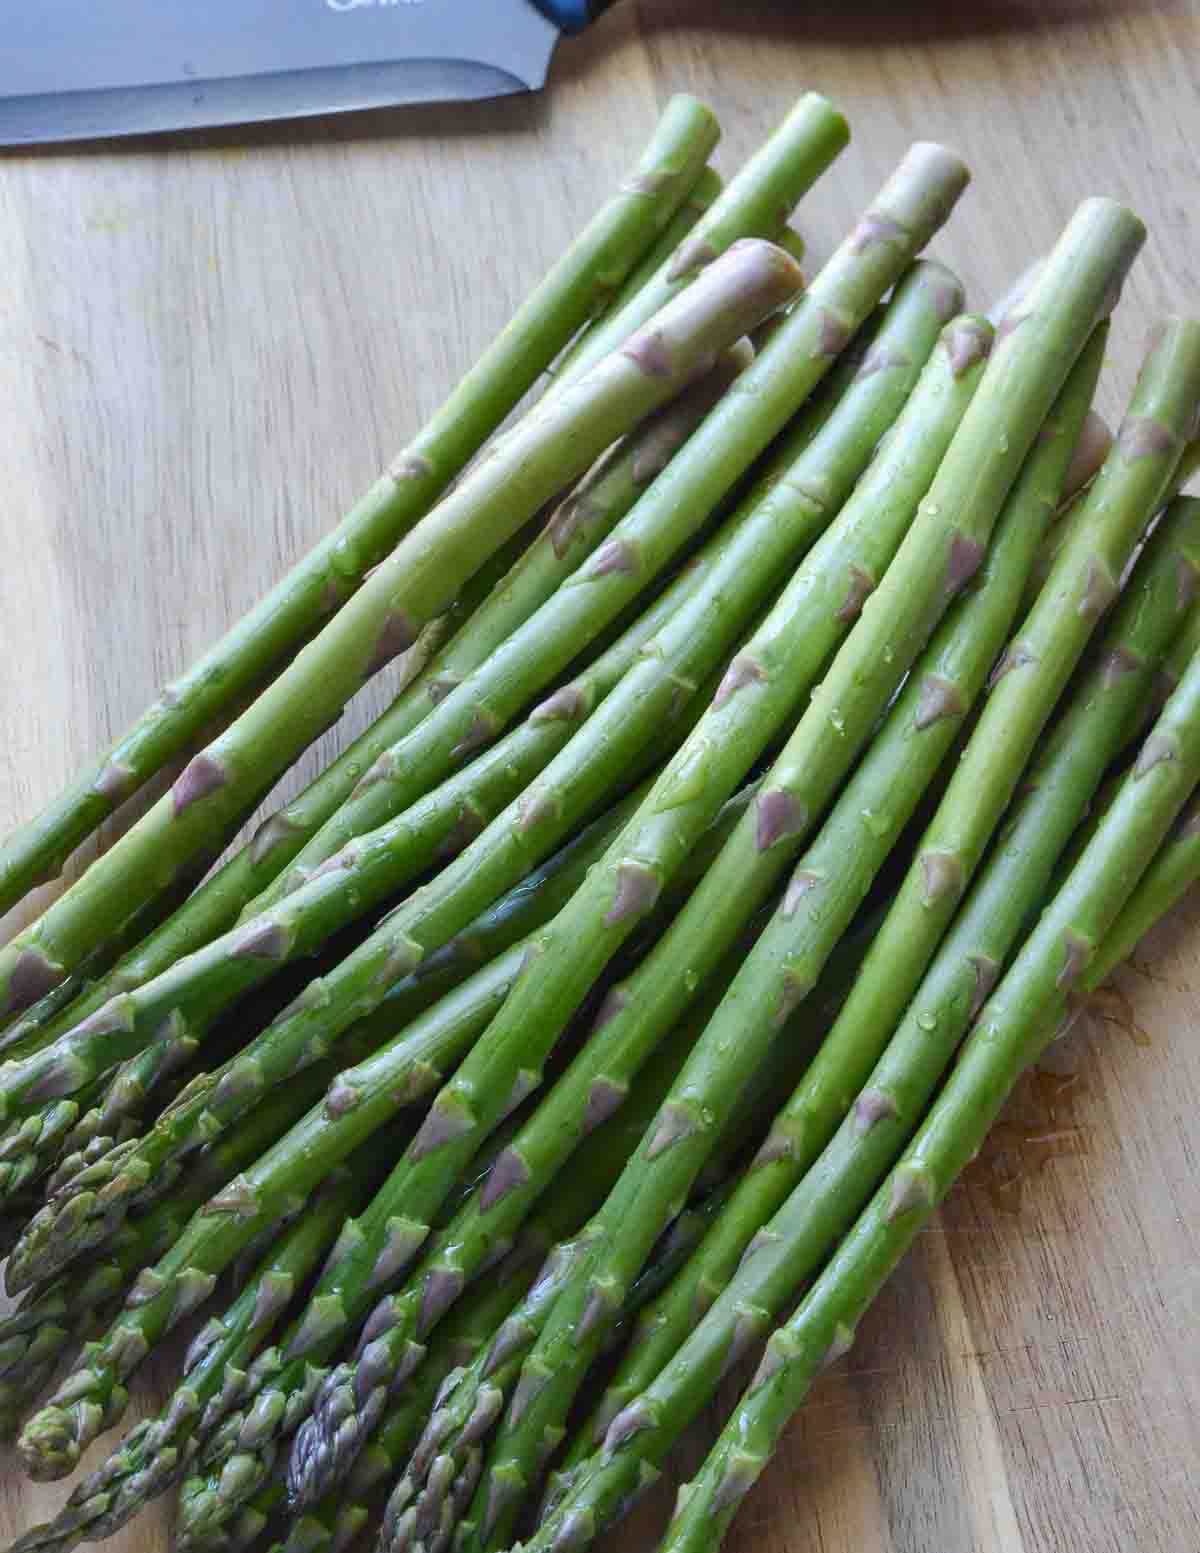 cleaned and washed asparagus ready to cook